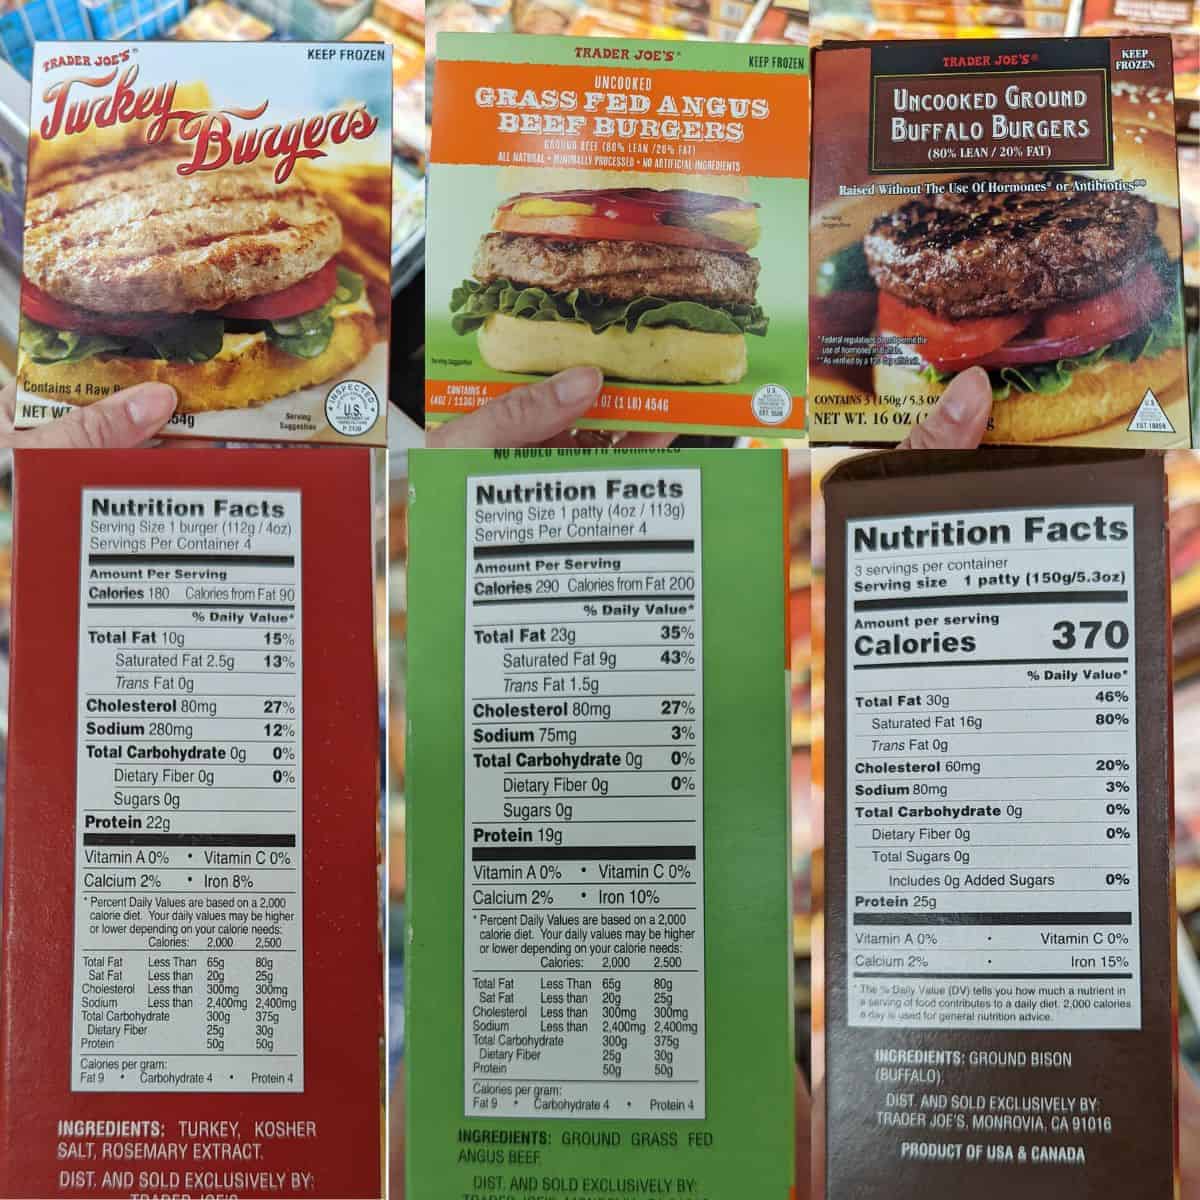 Packaging for' Trader Joes turkey burgers, bison burgers, and grass-fed burgers.